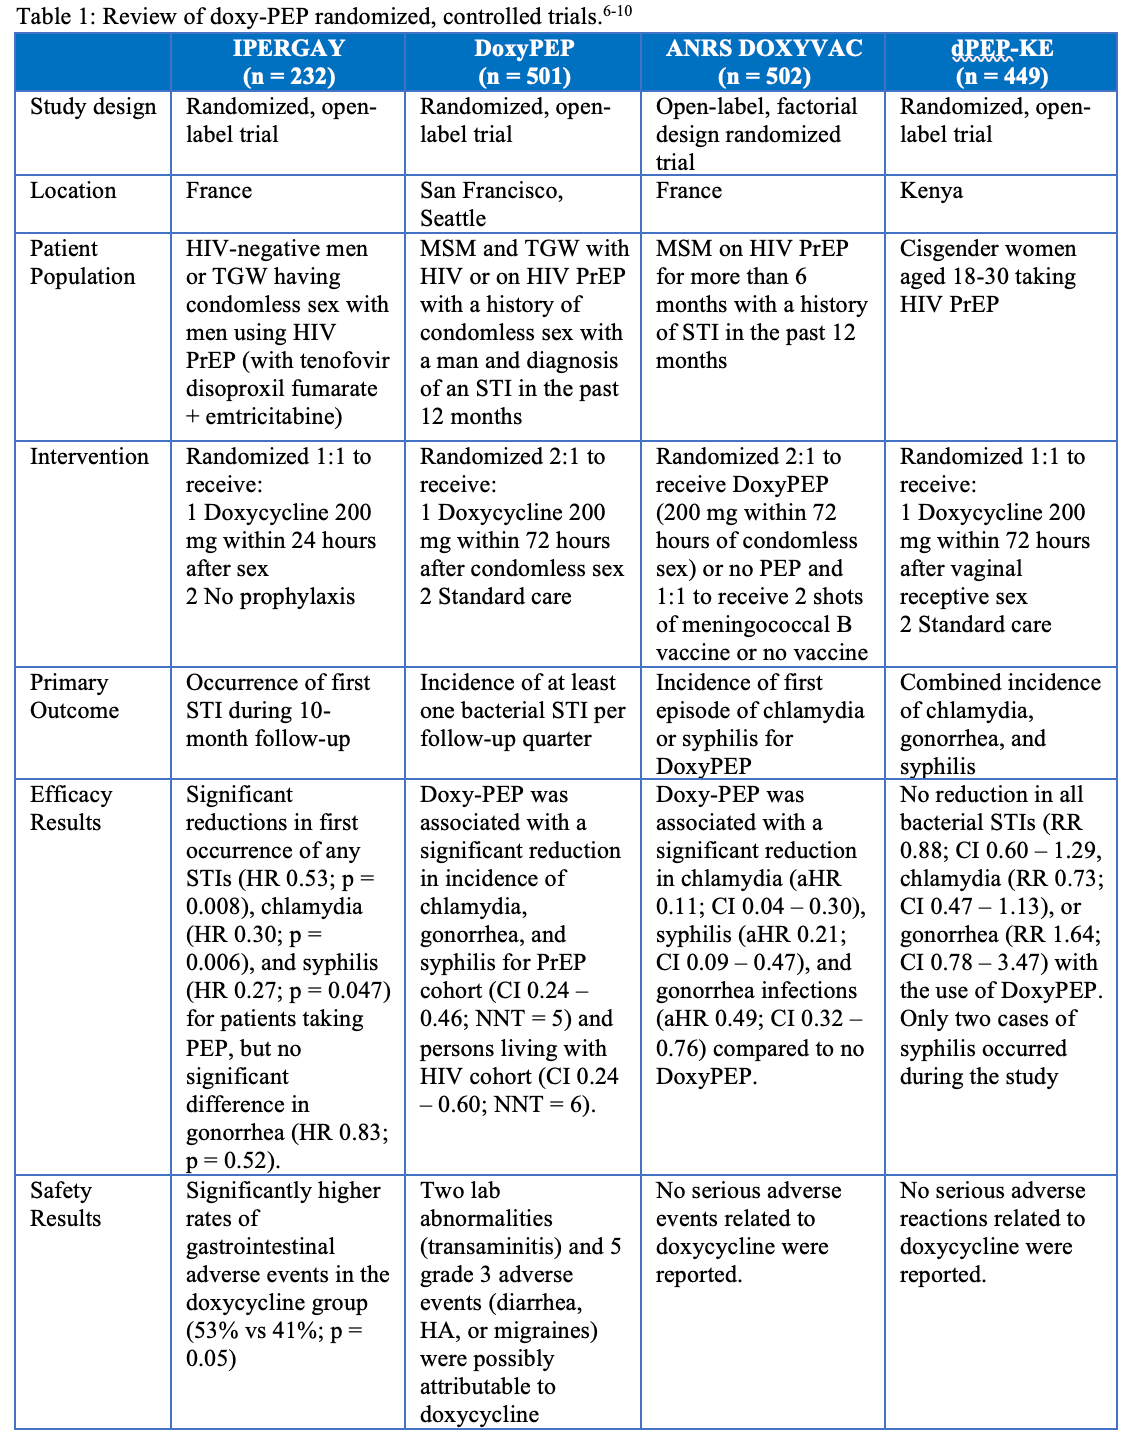 Table: Review of doxy-PEP randomized, controlled trials6-10